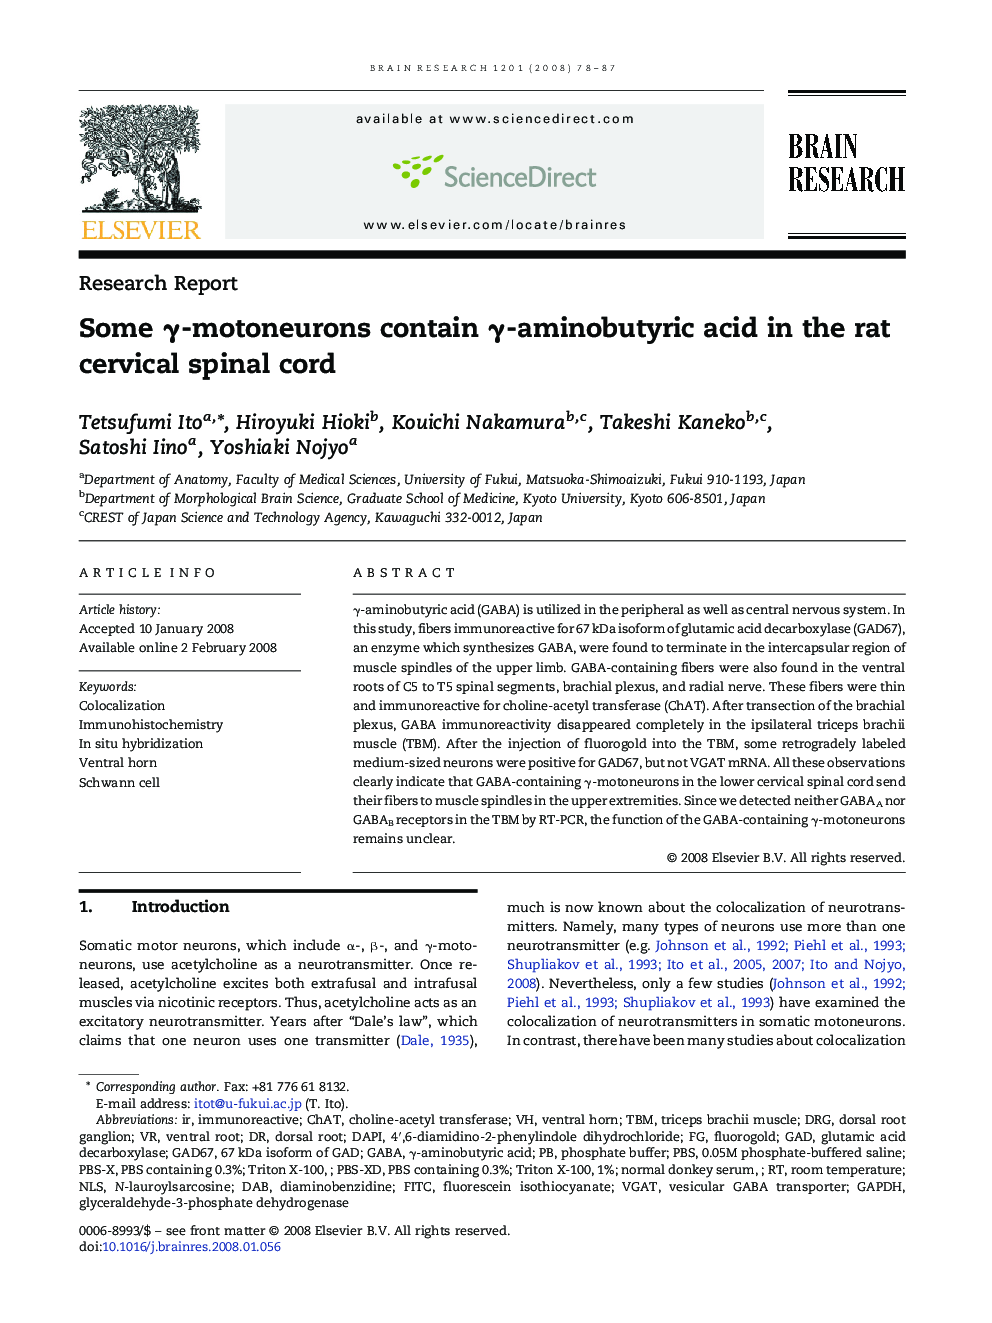 Some γ-motoneurons contain γ-aminobutyric acid in the rat cervical spinal cord